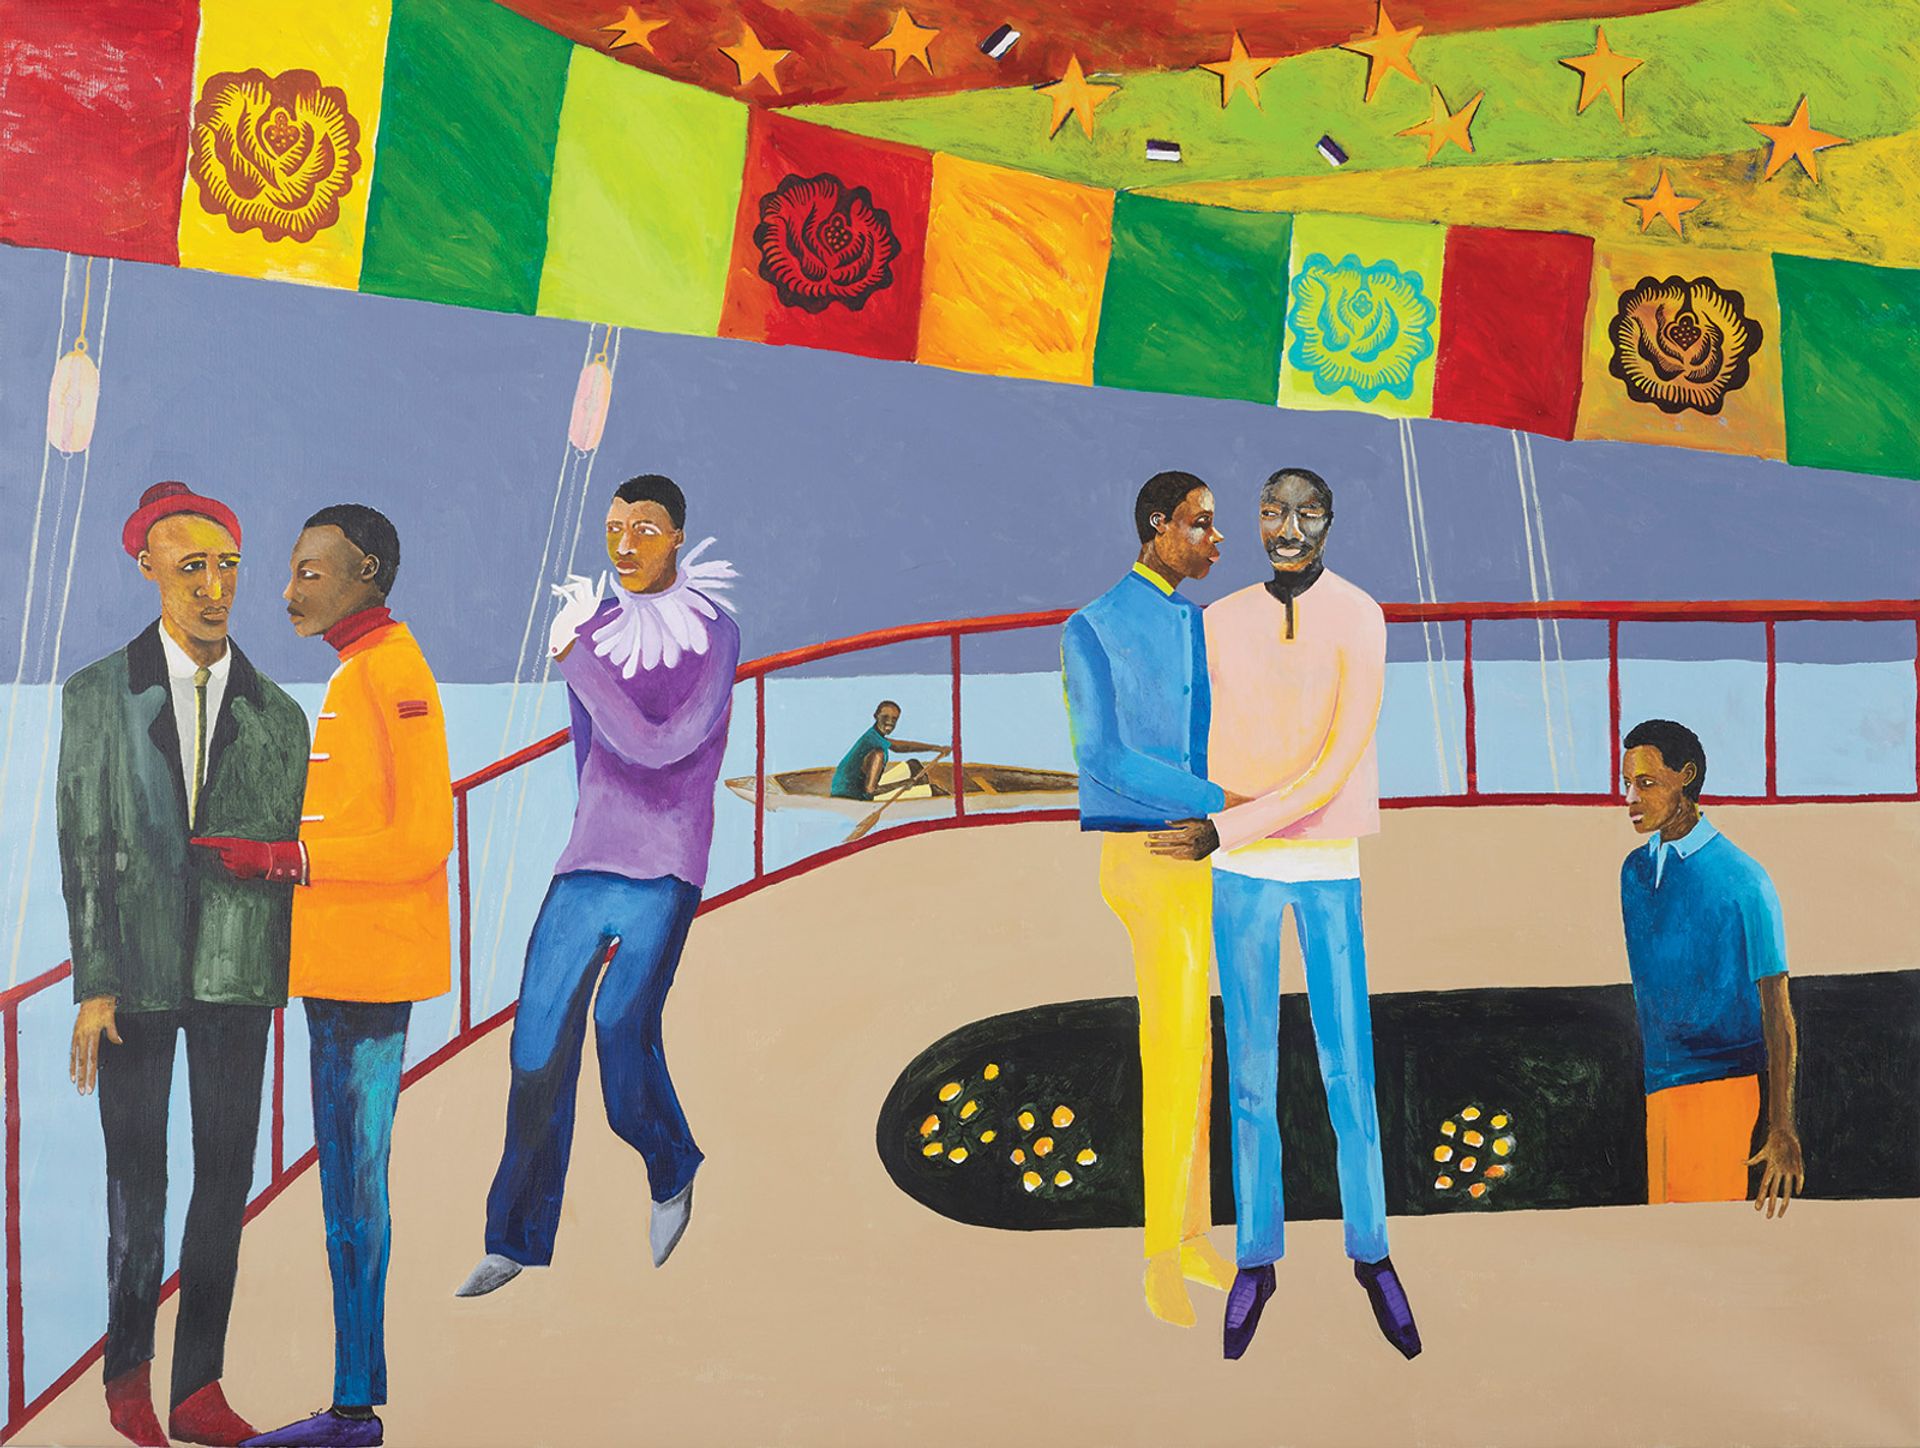 "Her paintings prompt you to try and understand what your relationship to the people pictured might be": Lubaina Himid's Ball on Shipboard (2018) Rennie Collection, Vancouver © Lubaina Himid